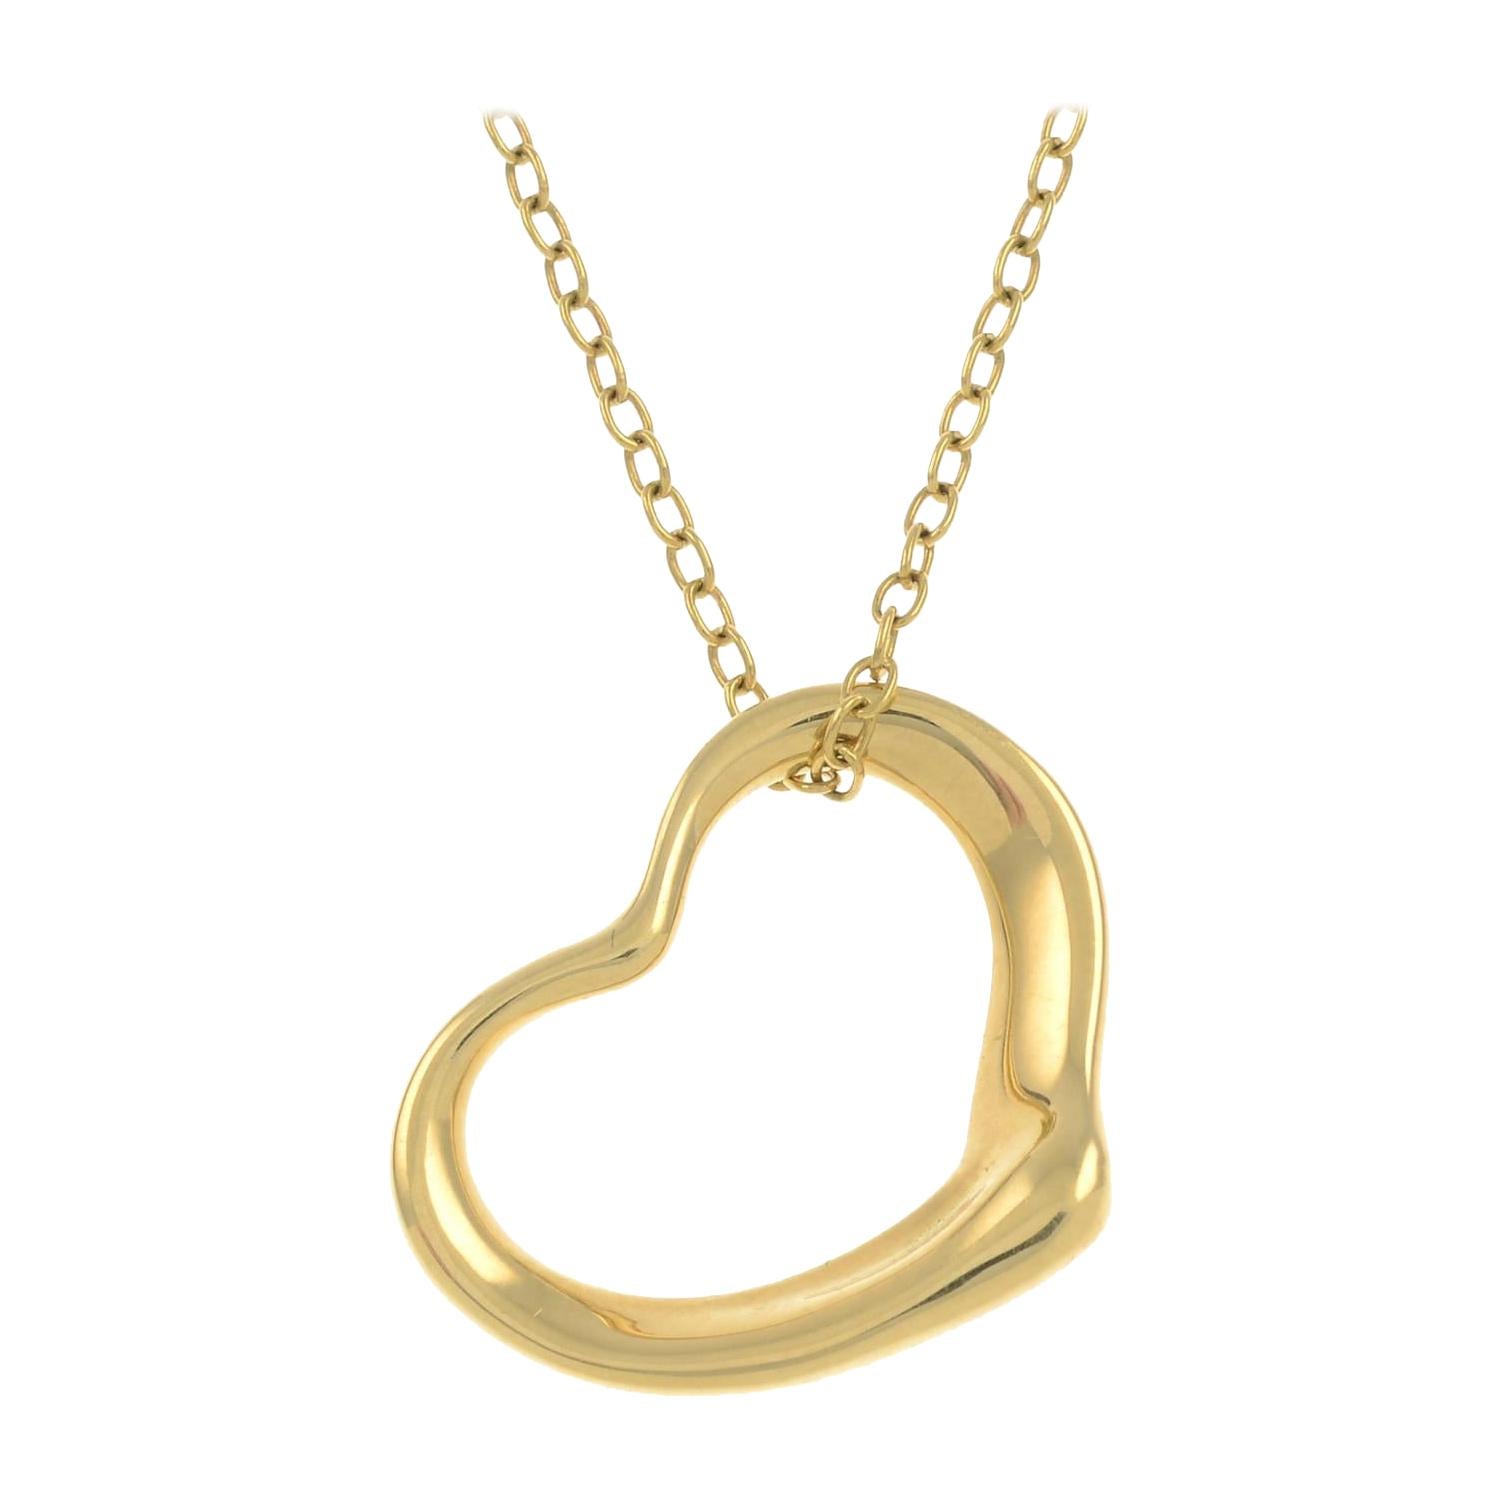 Open Heart Pendant with Chain by Elsa Peretti for Tiffany & Co.